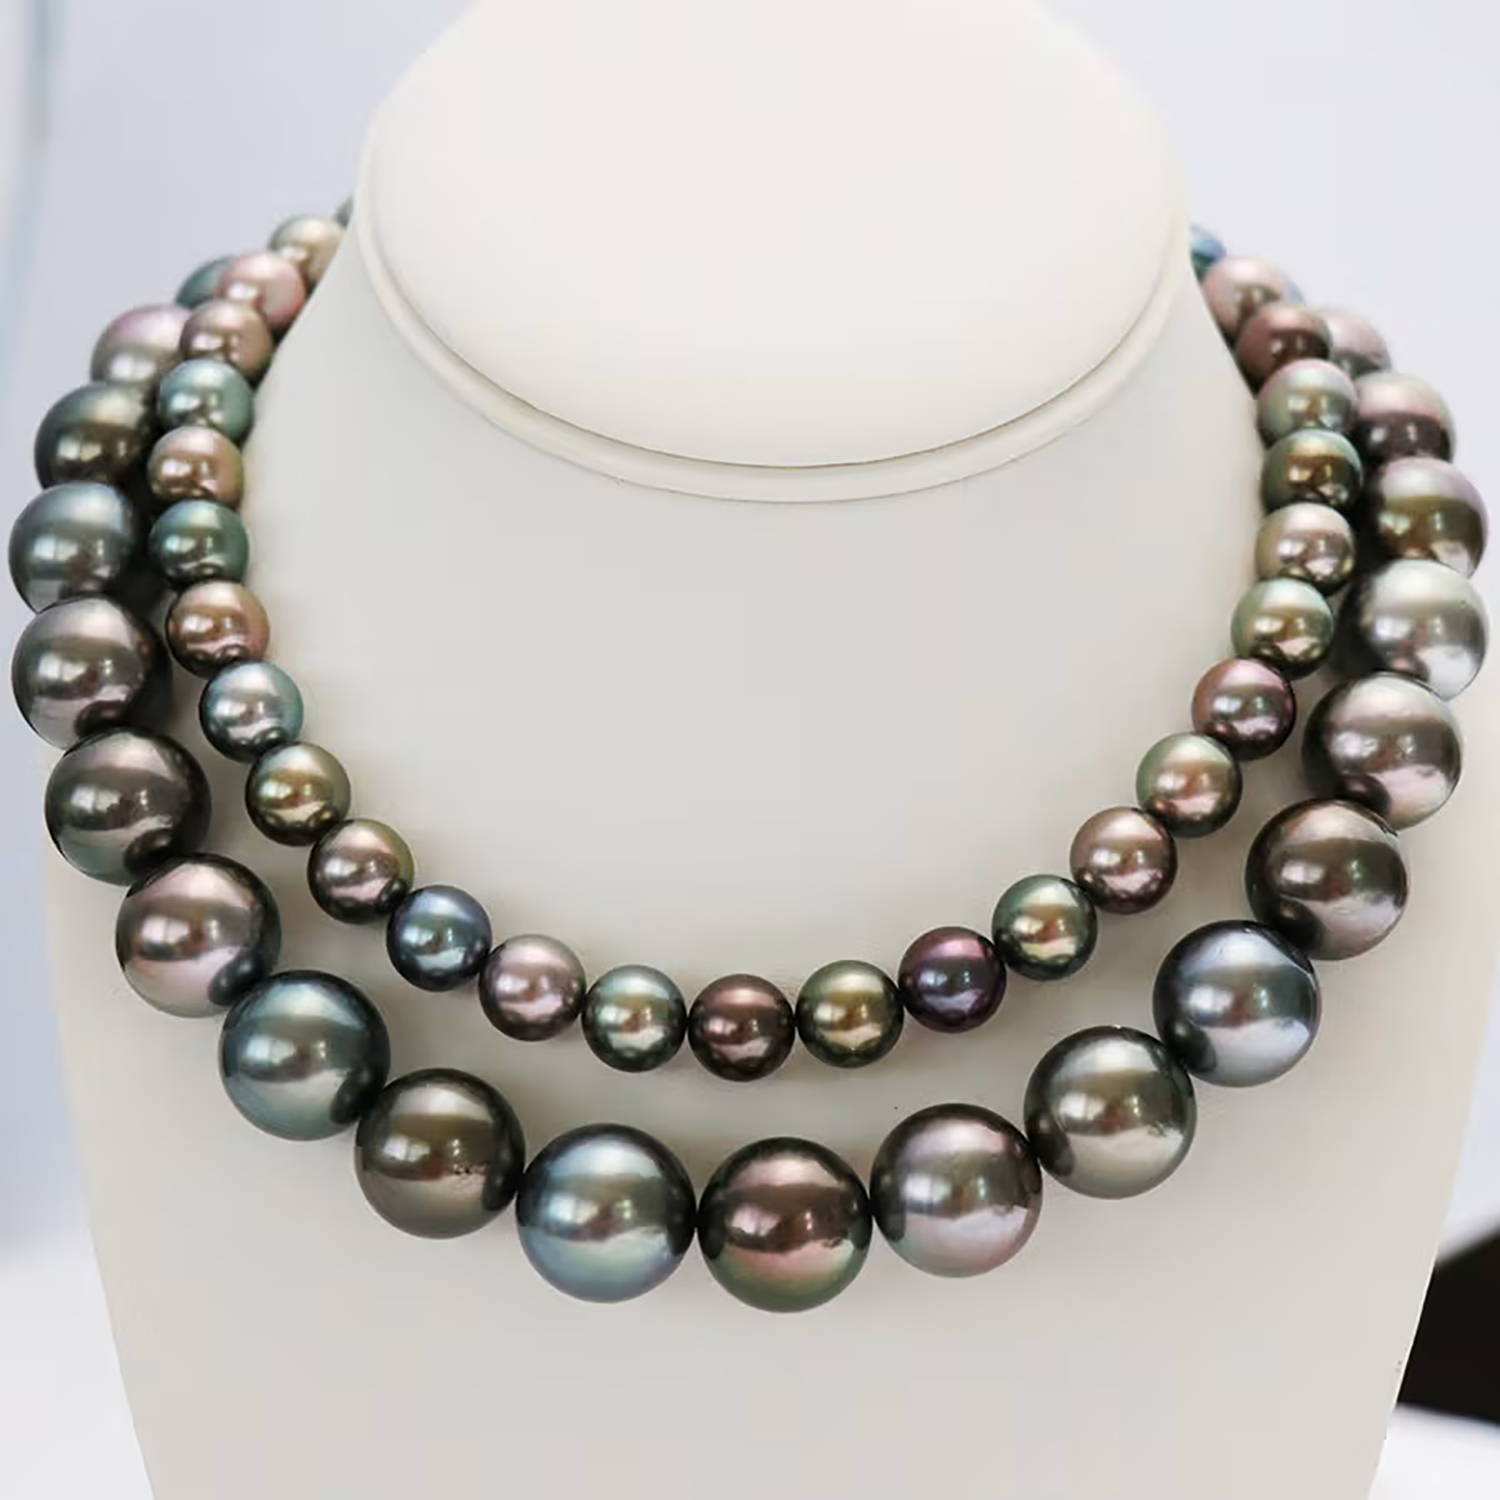 Tahitian Pearl Necklaces showing Multiple Hues